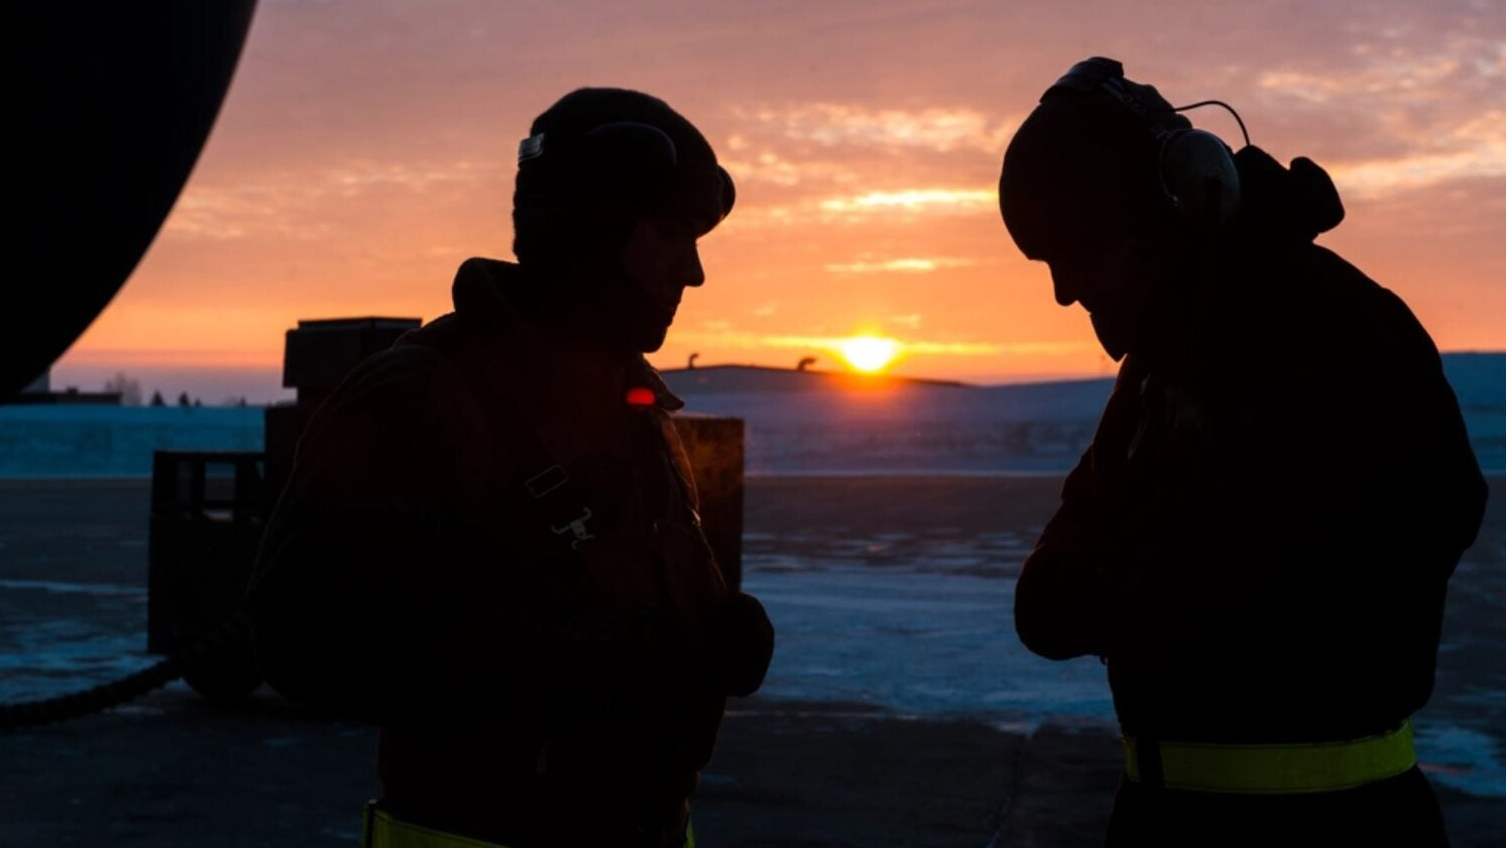 5th Aircraft Maintenance Squadron crew chiefs try to stay warm before launching an aircraft at Minot Air Force Base, N.D., Jan 26, 2017. Crew chiefs arrive at the aircraft before the aircrew to perform pre-flight inspections to ensure a safe launch. (U.S. Air Force photo by Senior Airman J.T. Armstrong)